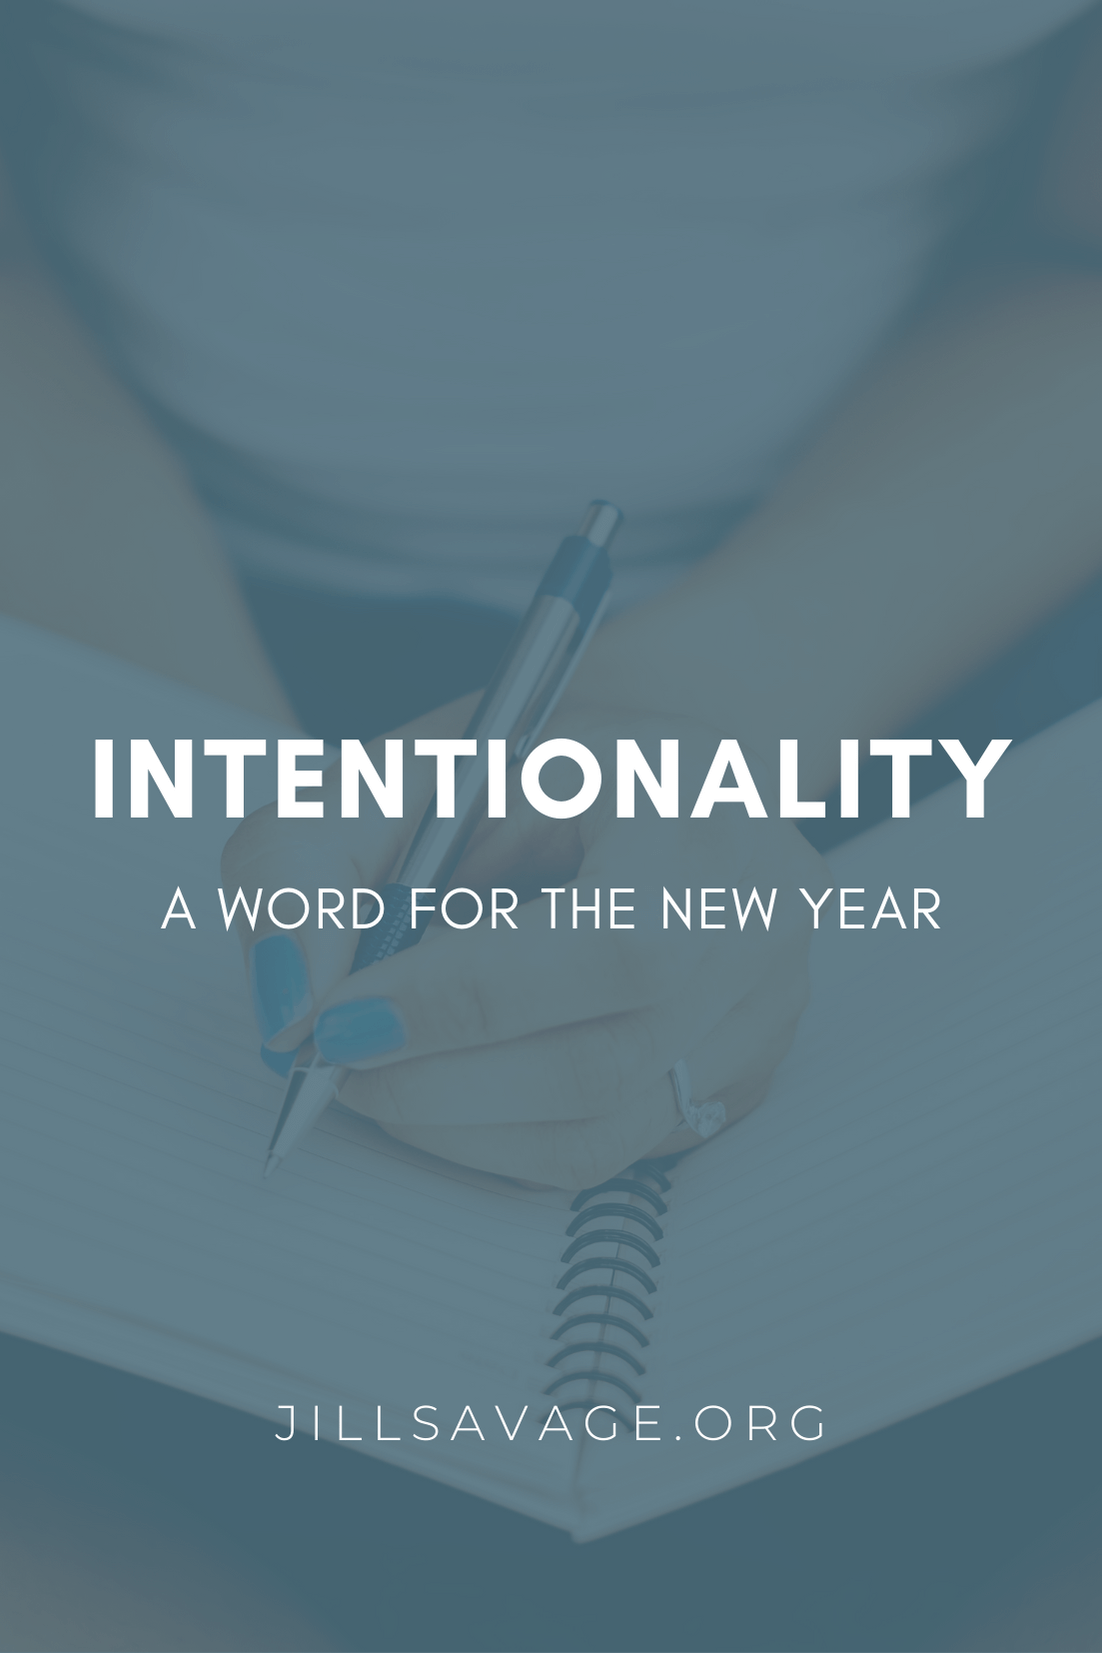 A Word for the New Year: Intentionality